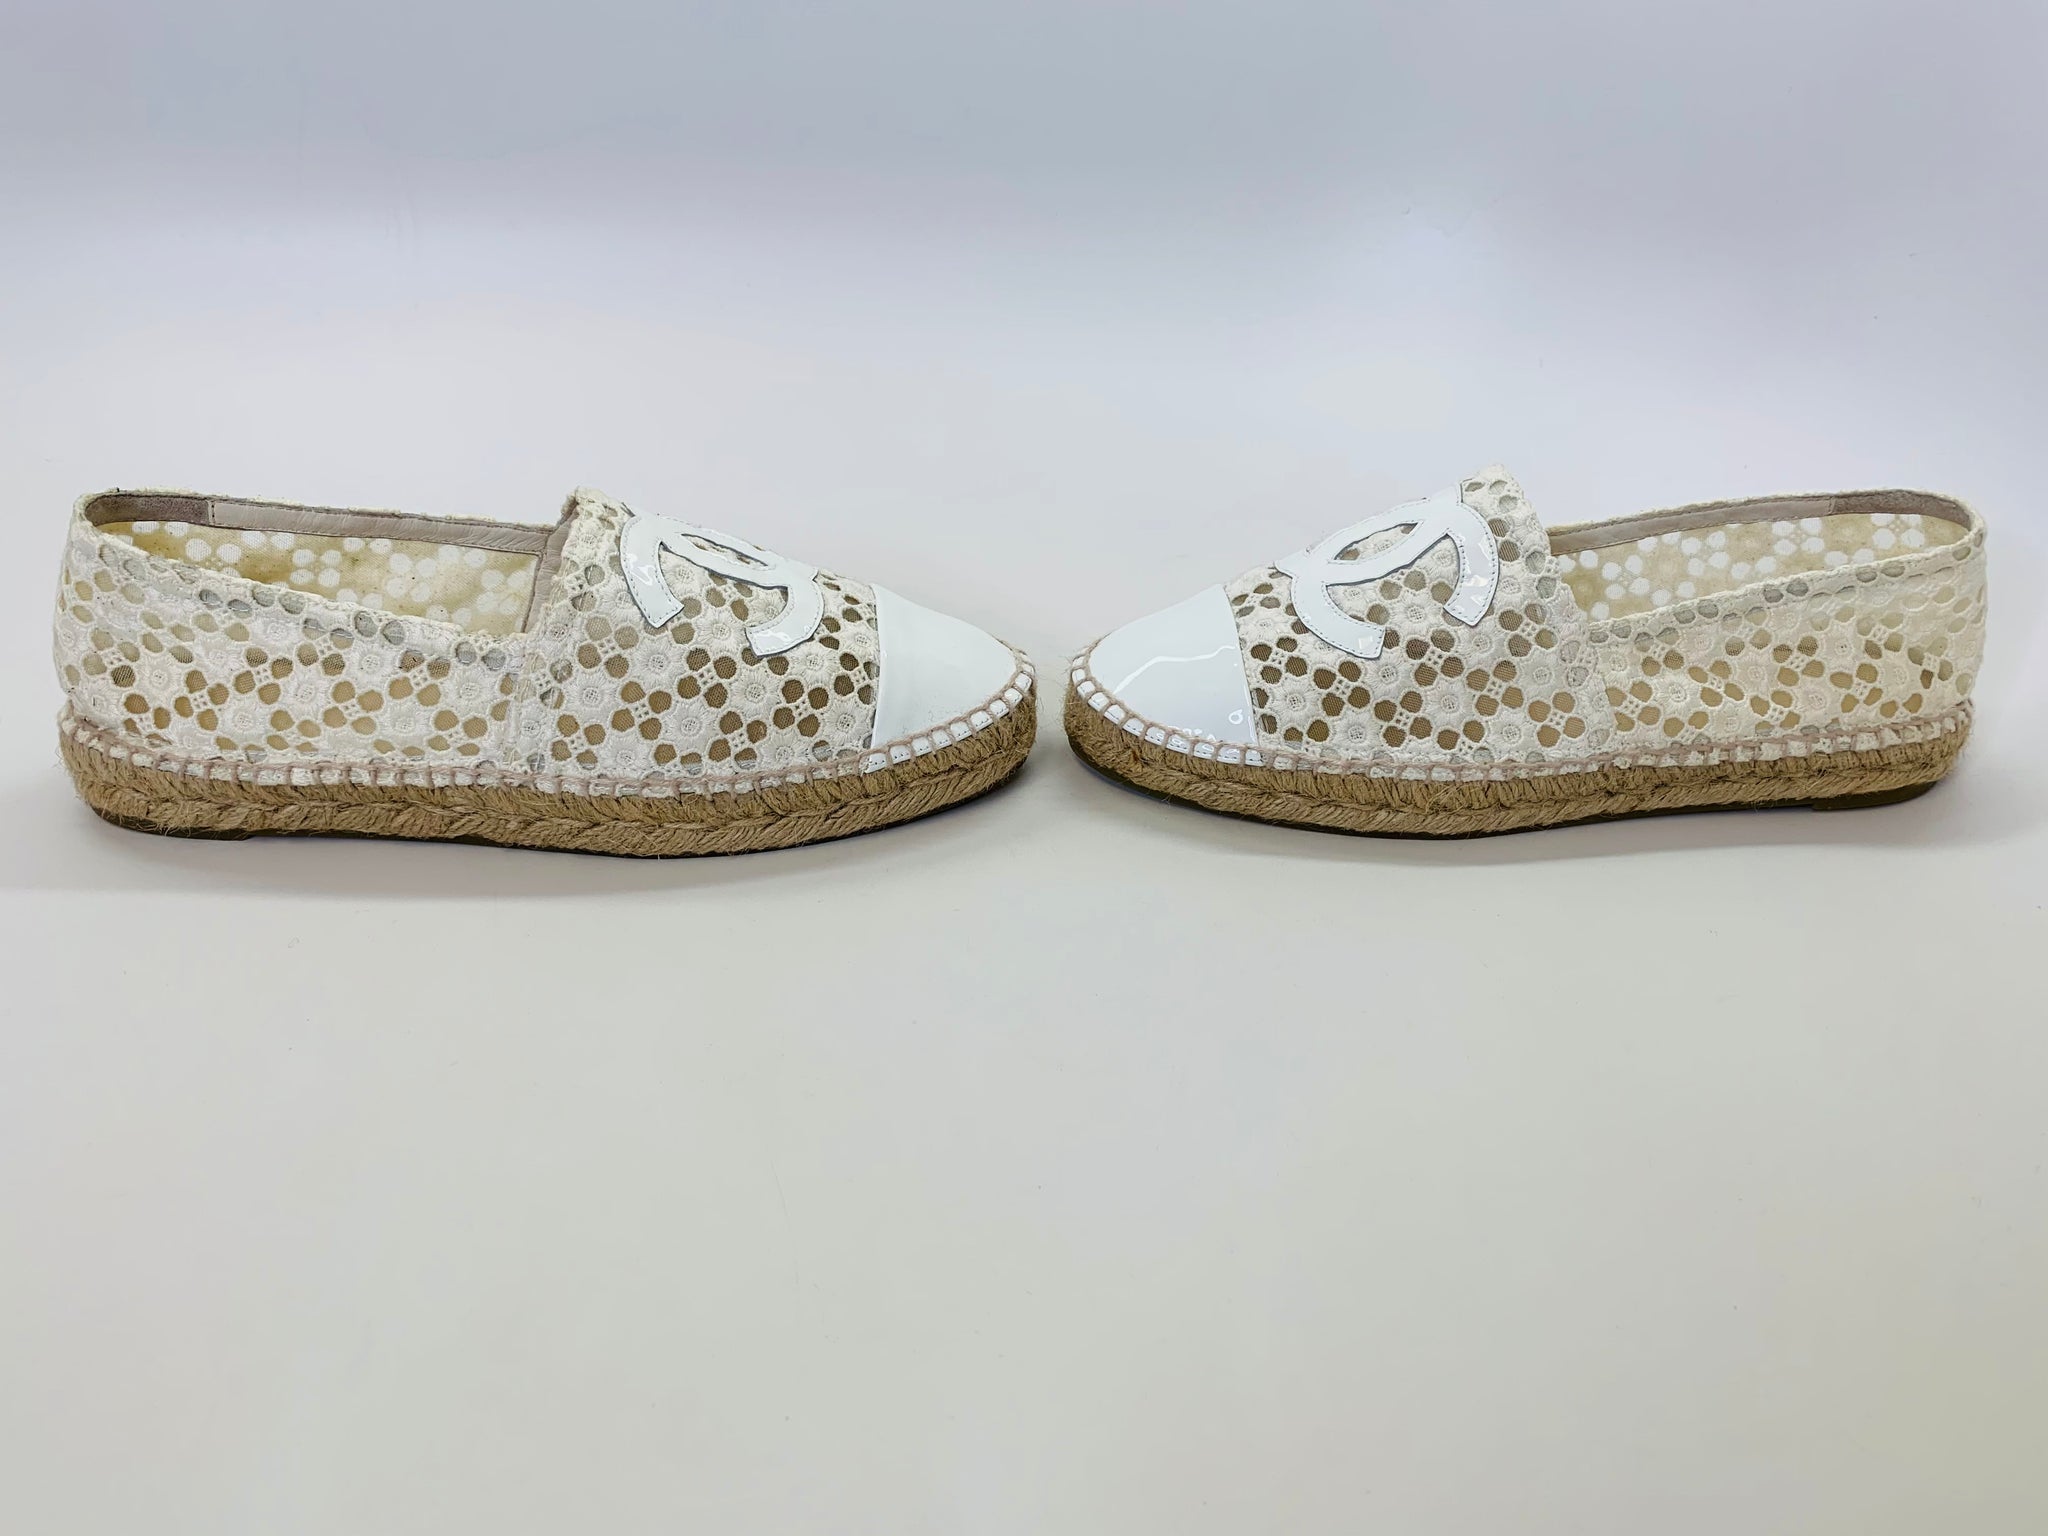 CHANEL Ivory Crochet and Patent Leather Espadrilles Size 39 – JDEX Styles